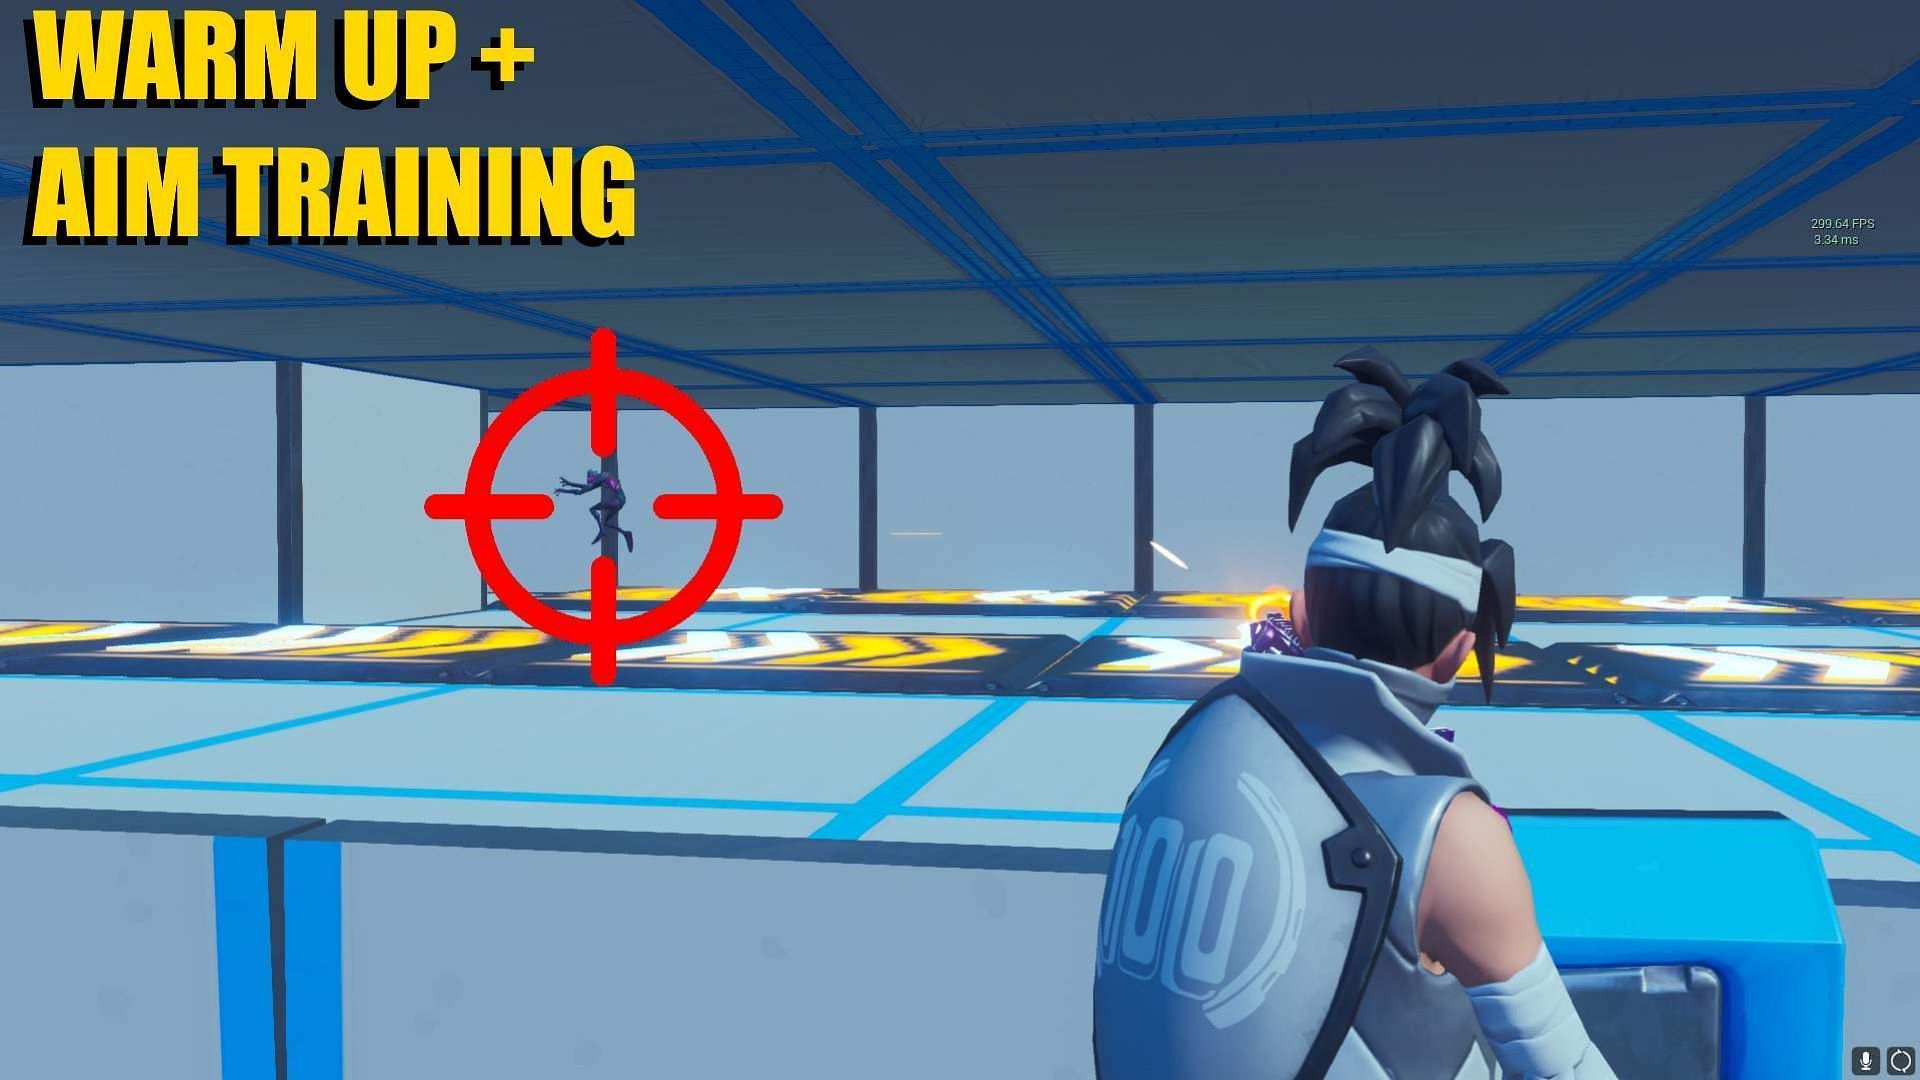 The Best Fortnite Creative Maps for Practicing Your Aim - Kr4m